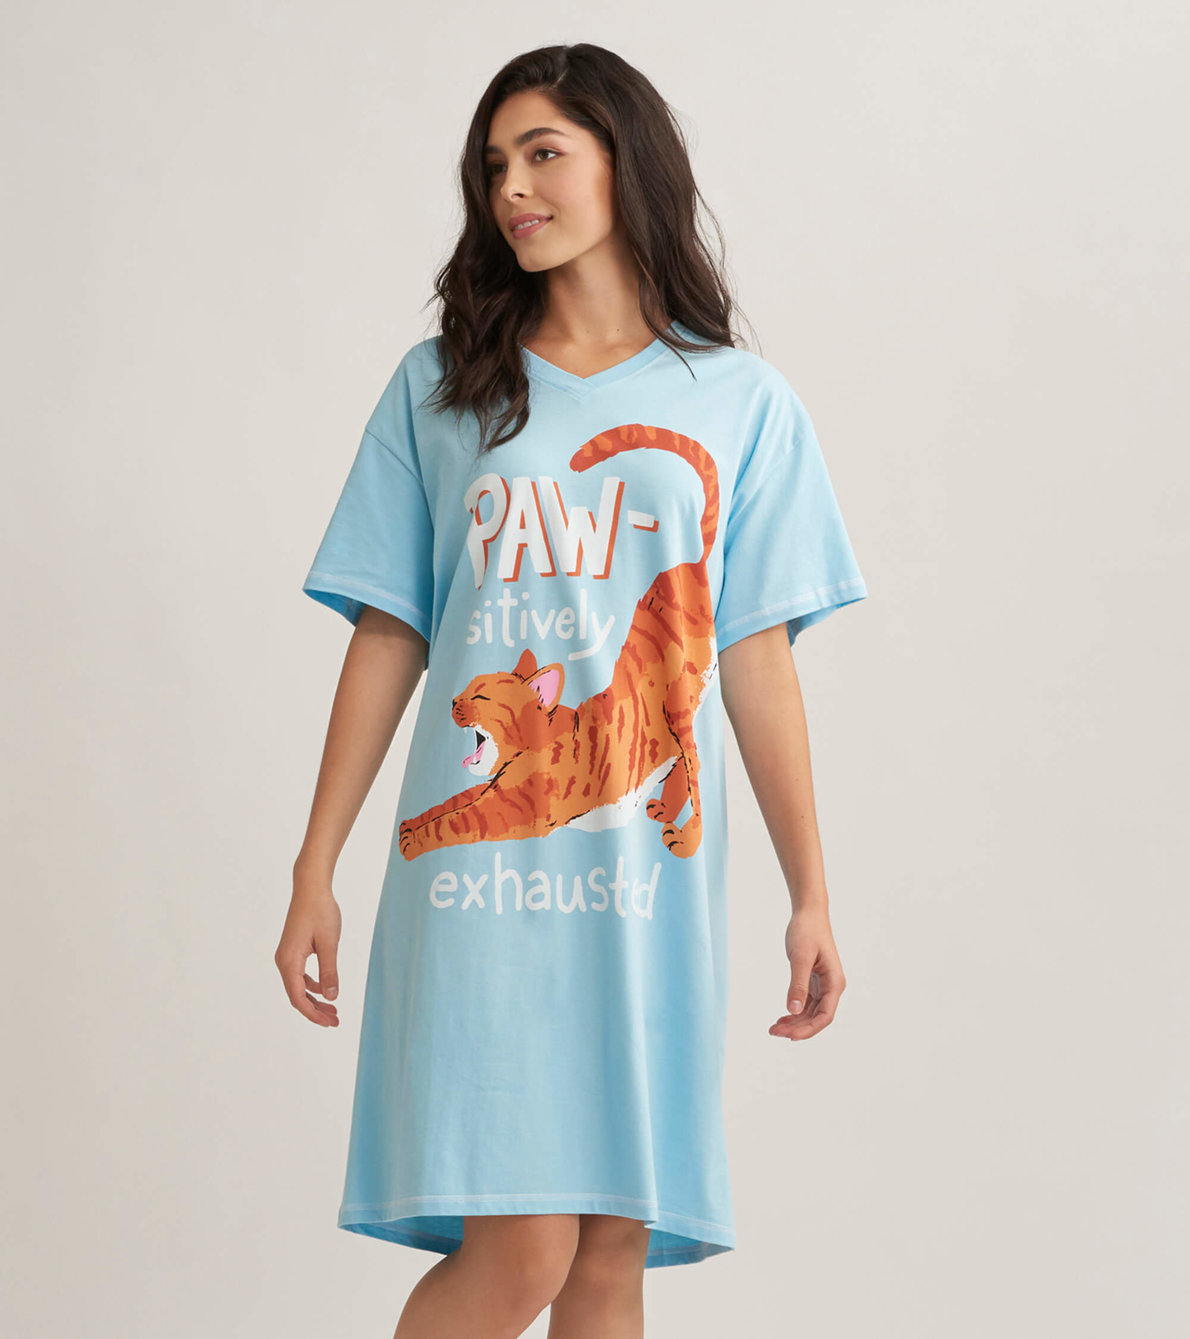 View larger image of PAWsitively Exhausted Women's Sleepshirt